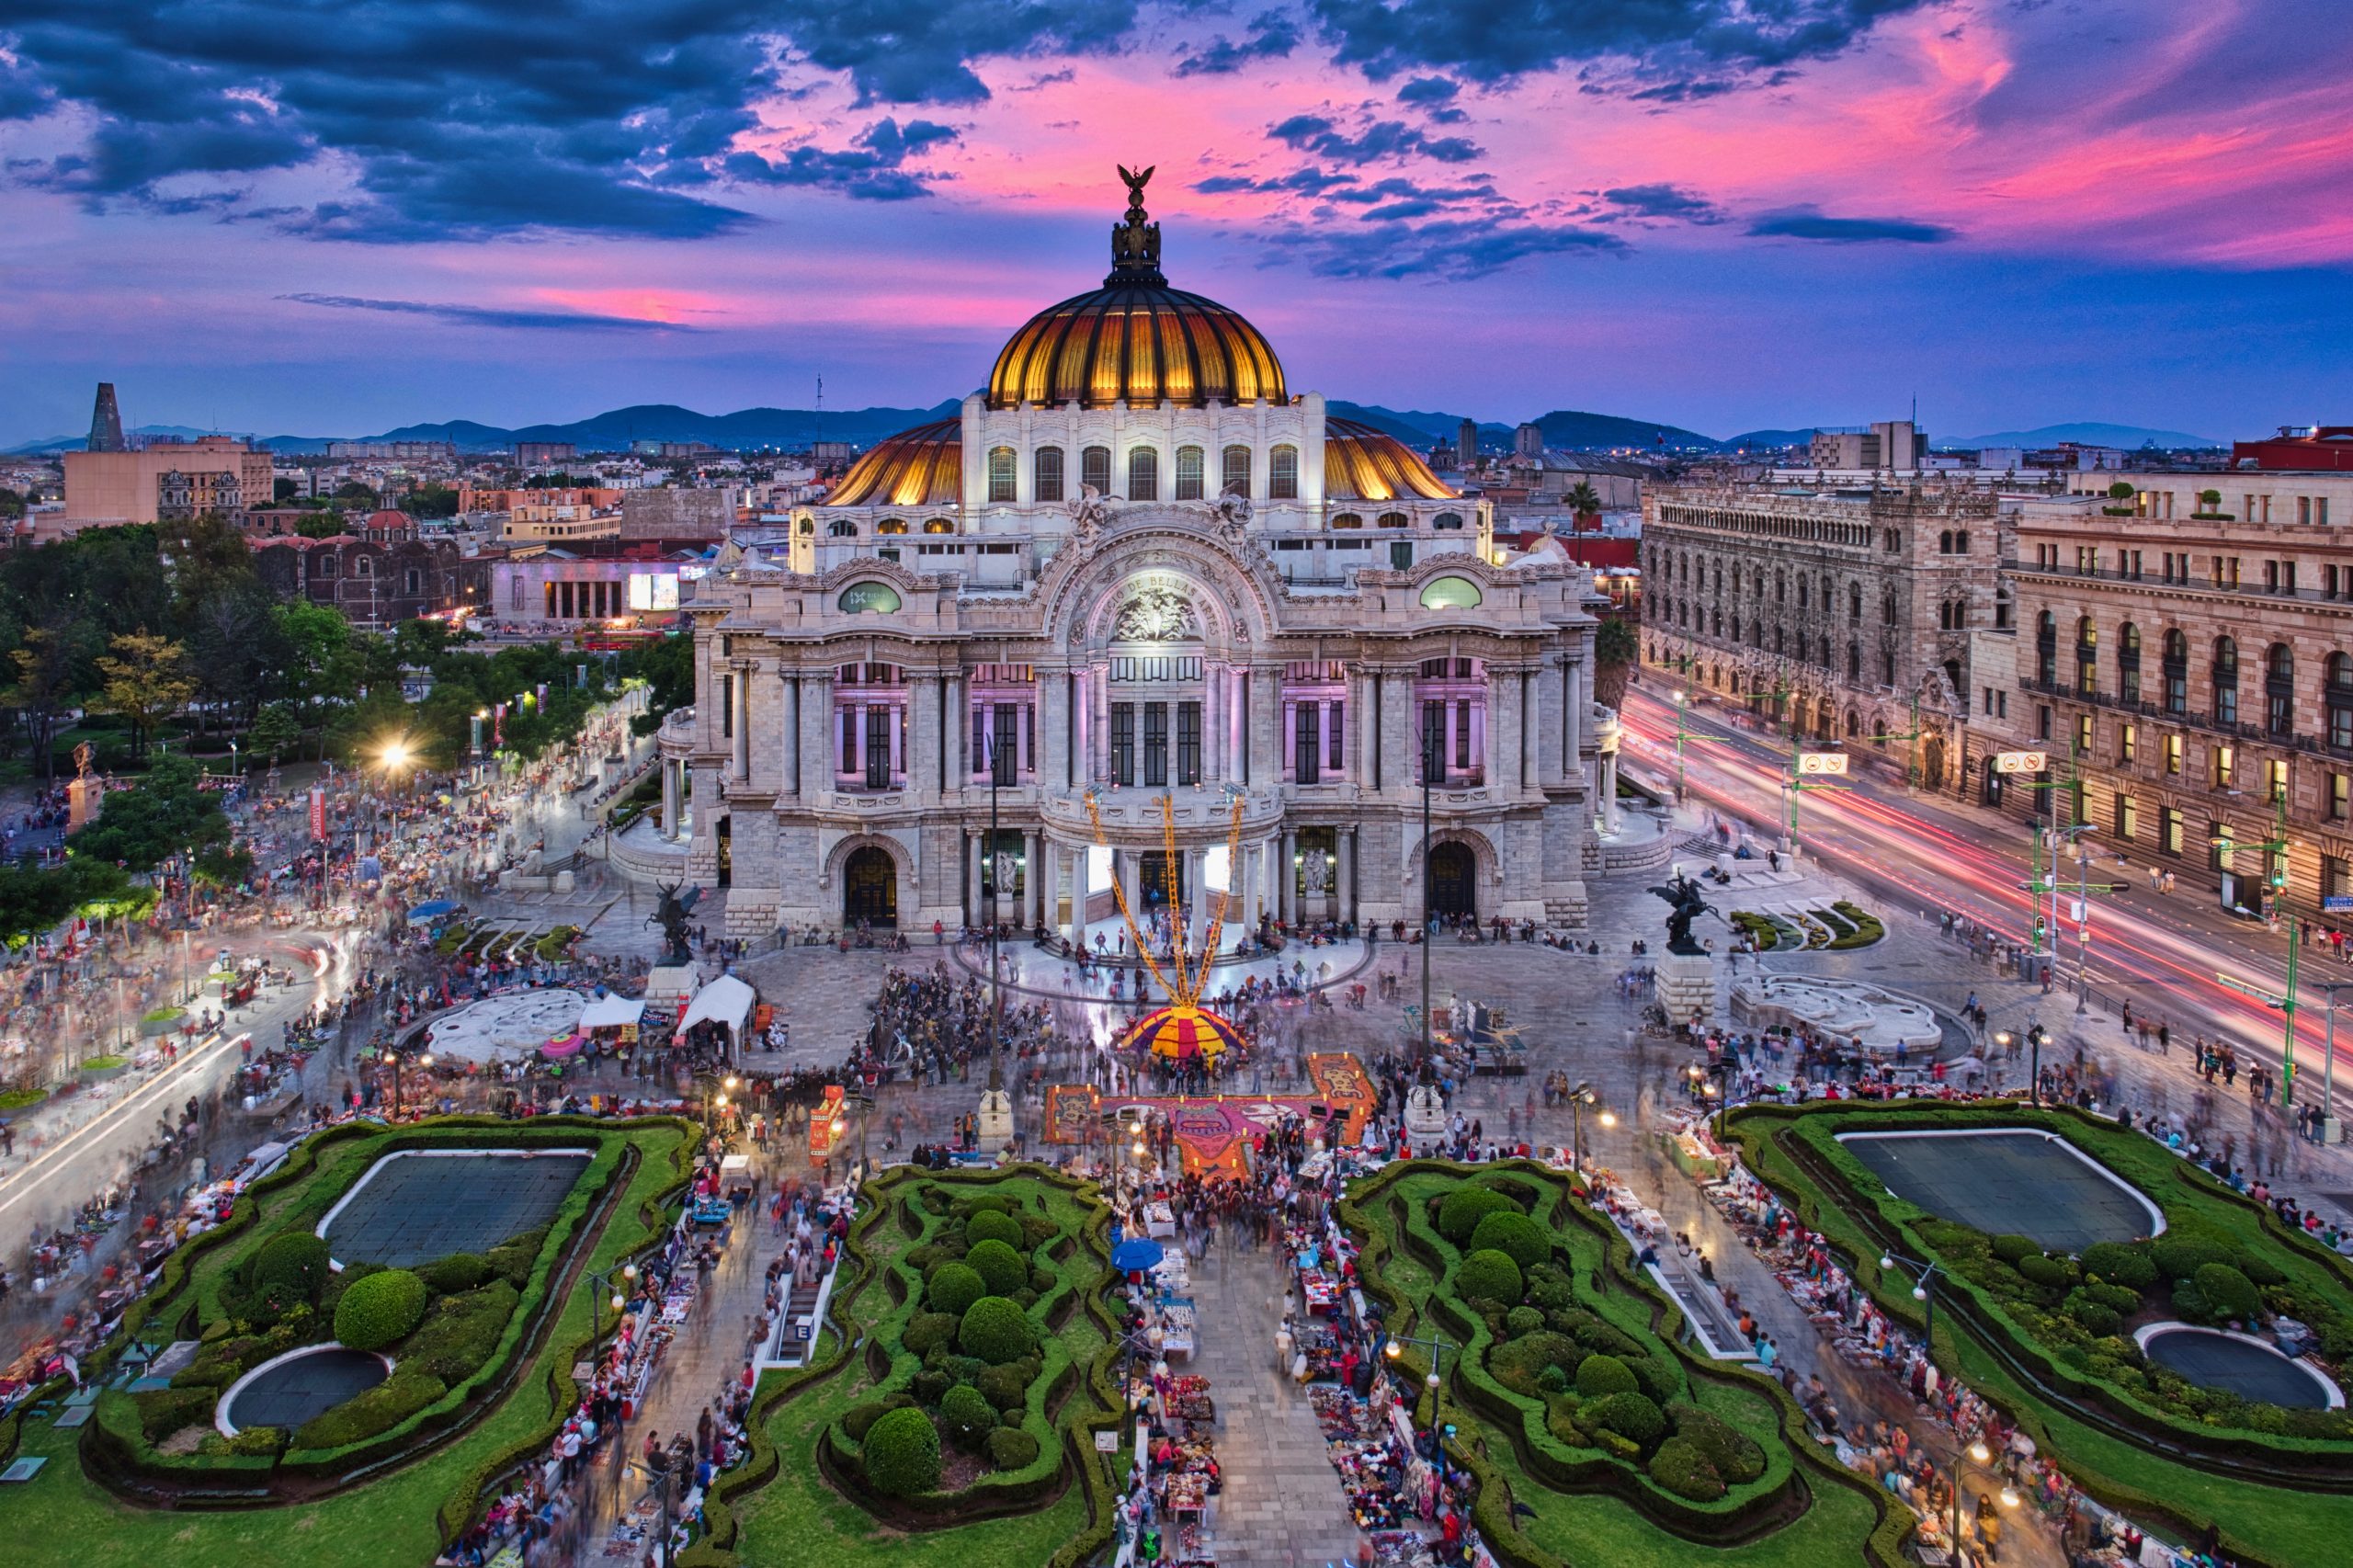 10 Best Remote Cities to Visit in Mexico